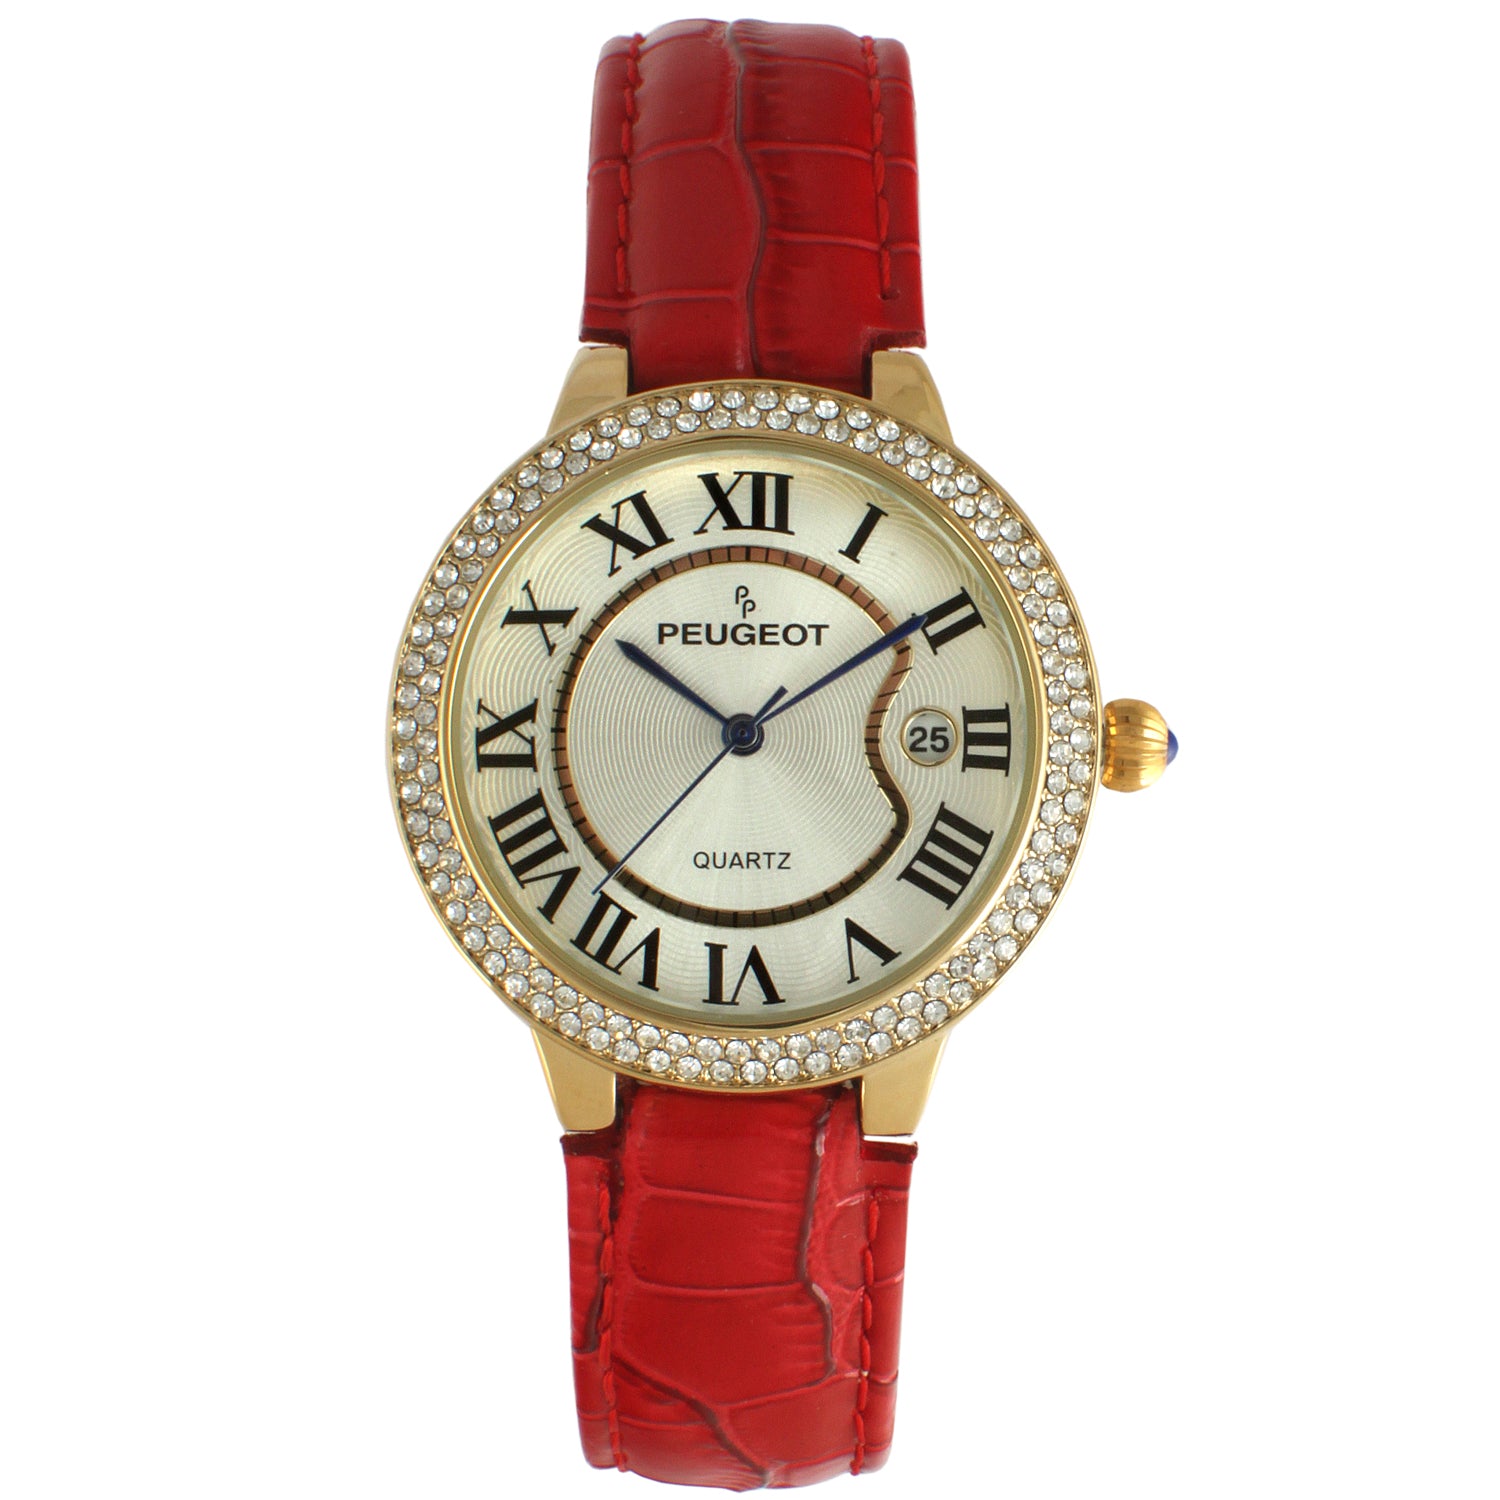 Peugeot Women Watch Two-Tone Square Tank Shape W/ Red Leather Strap ...